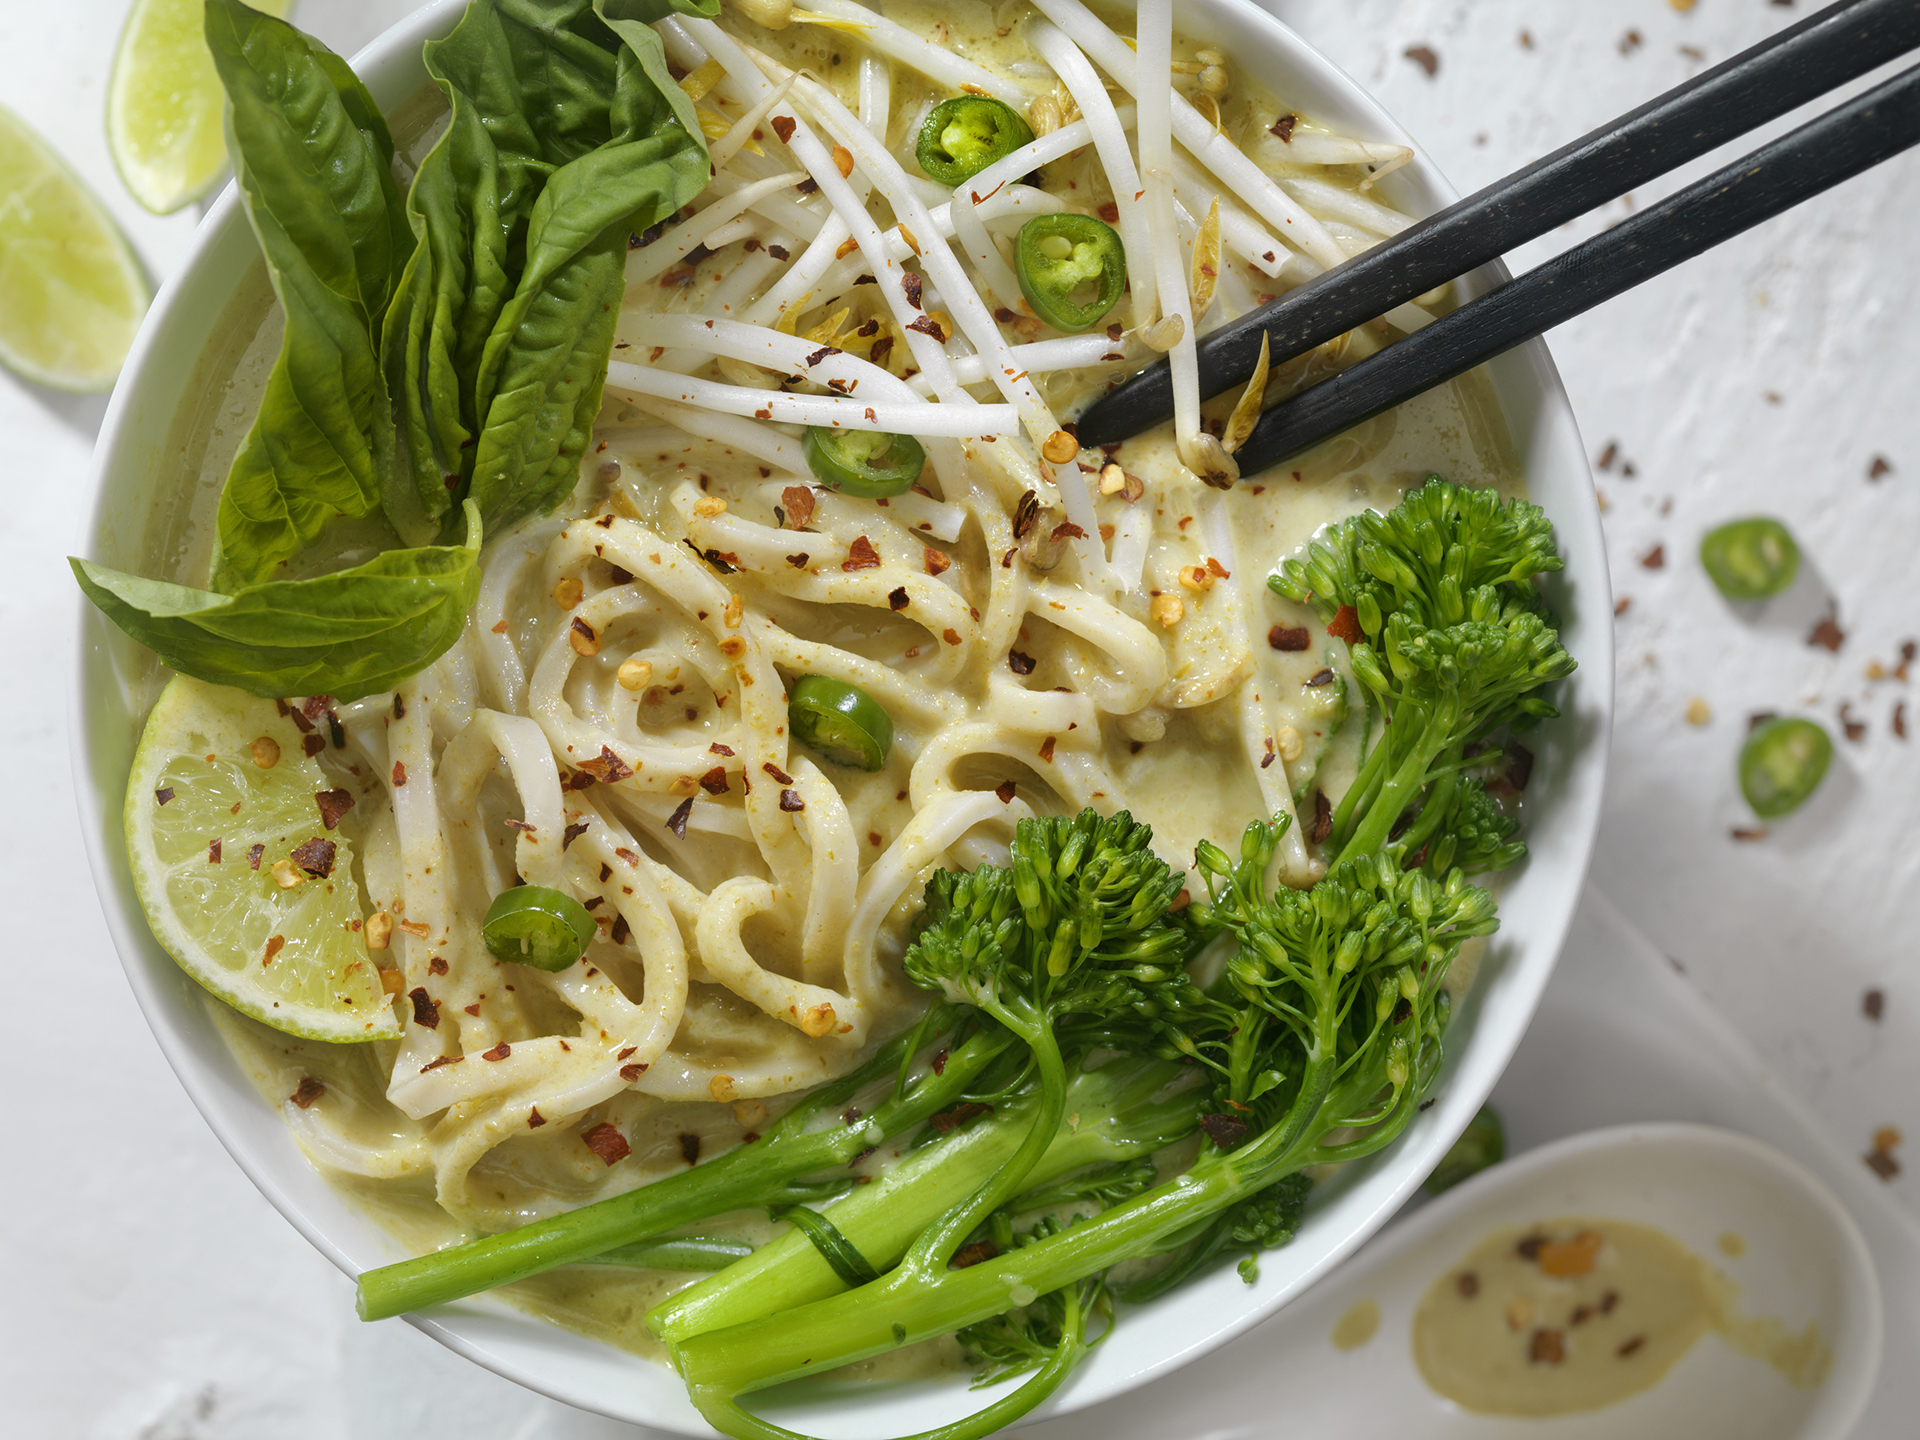 Thai Green Curry Noodle Soup with Broccoli, Bean Sprouts, Fresh Basil, Lime and Chili Flakes